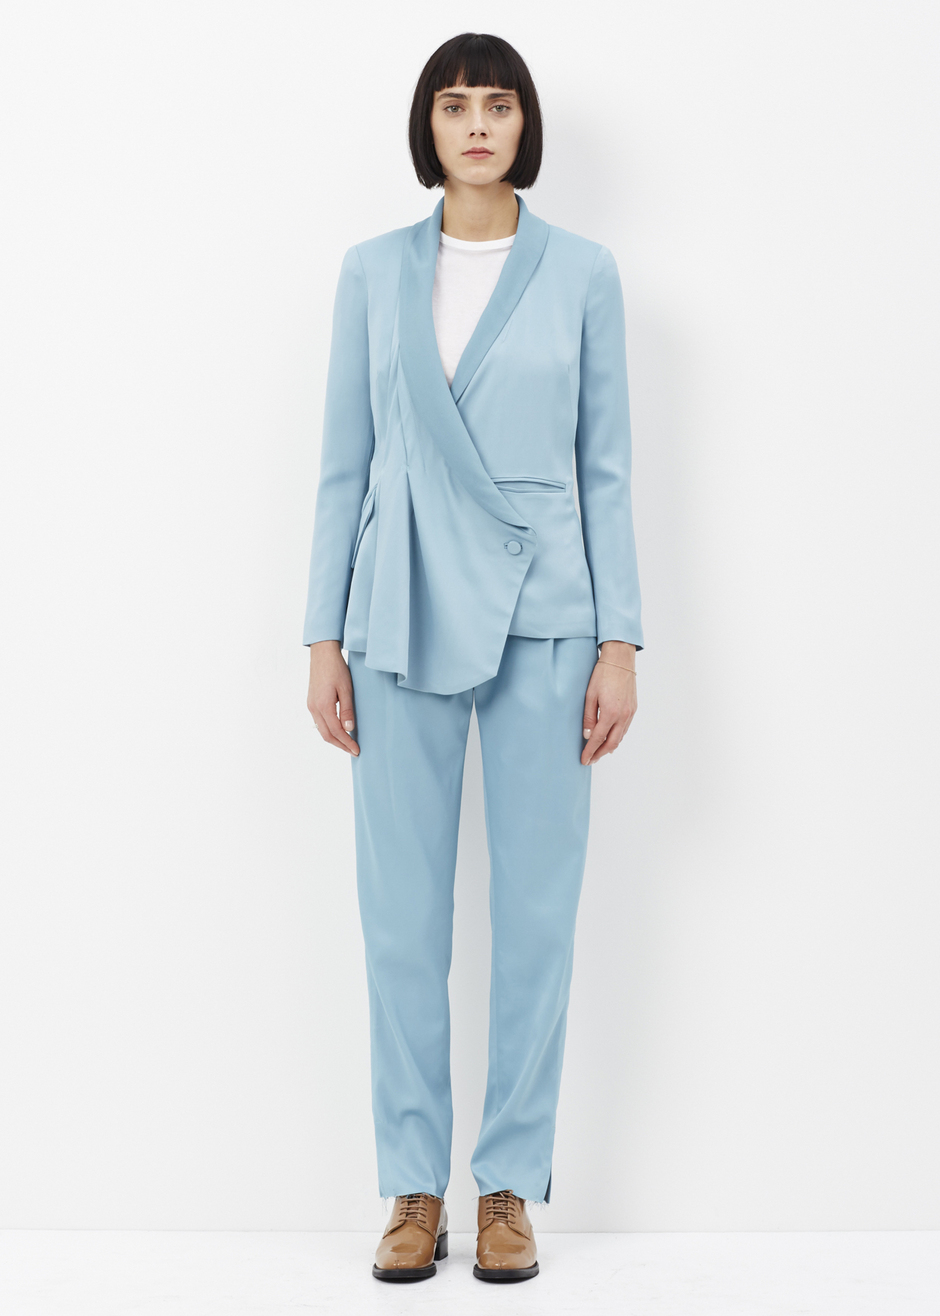 Fashion Trend: 2017 Is the Year of the Pantsuit - theFashionSpot